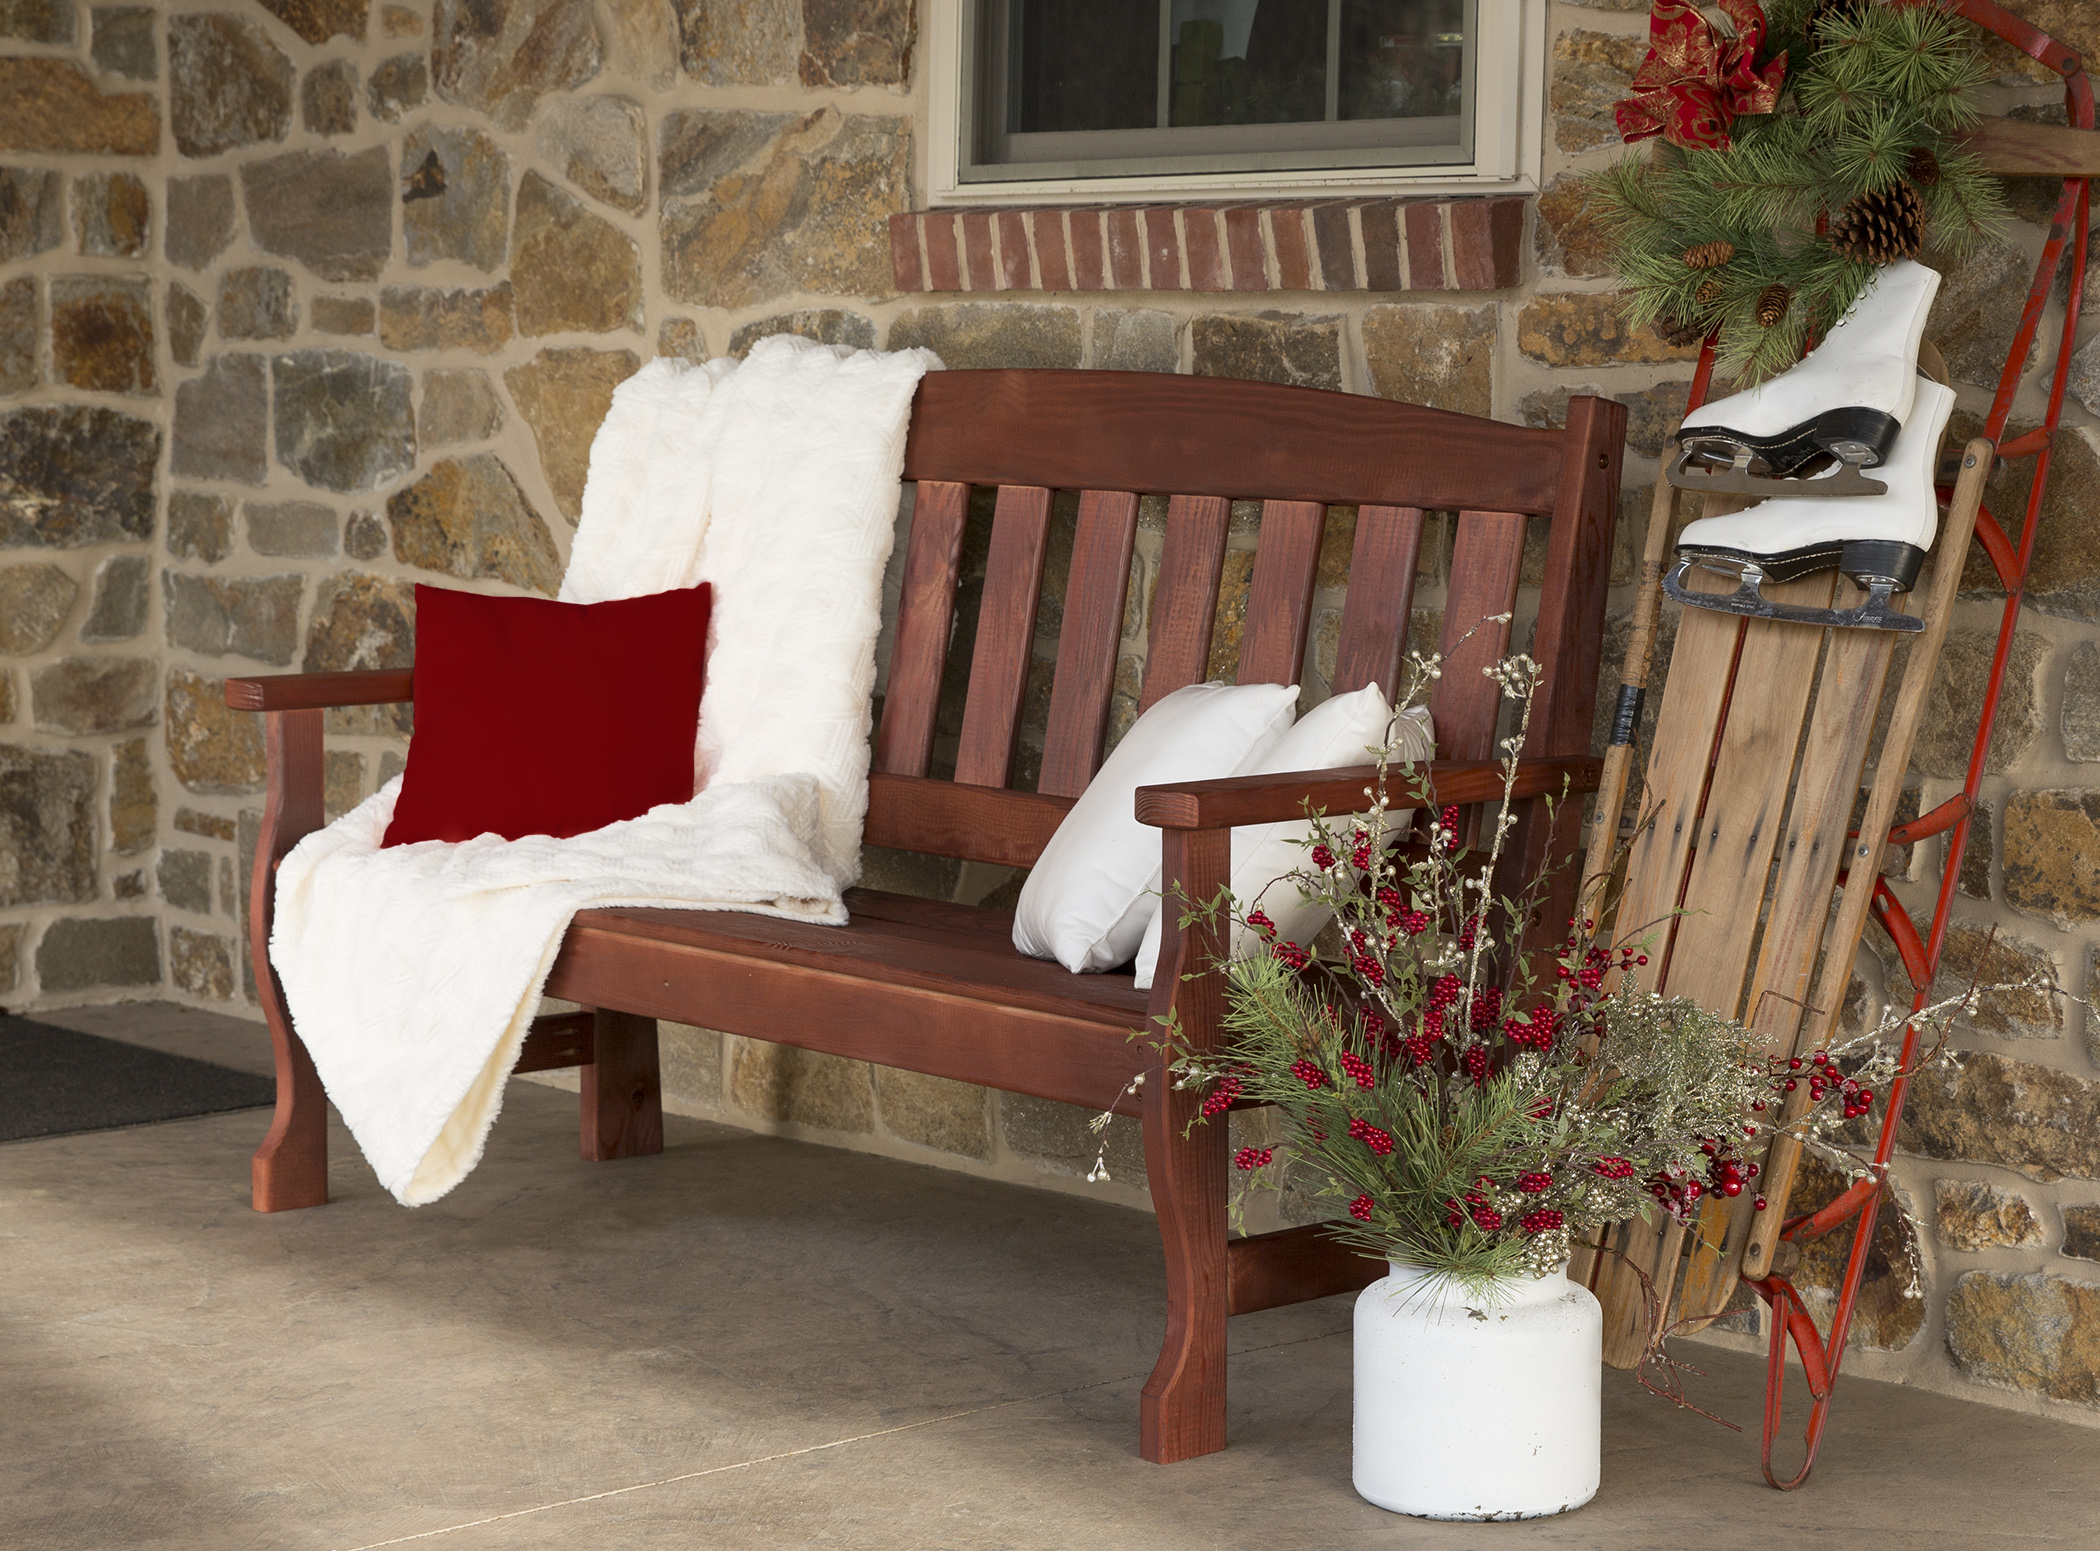 staged-porch-wood-furniture-photography-ideas